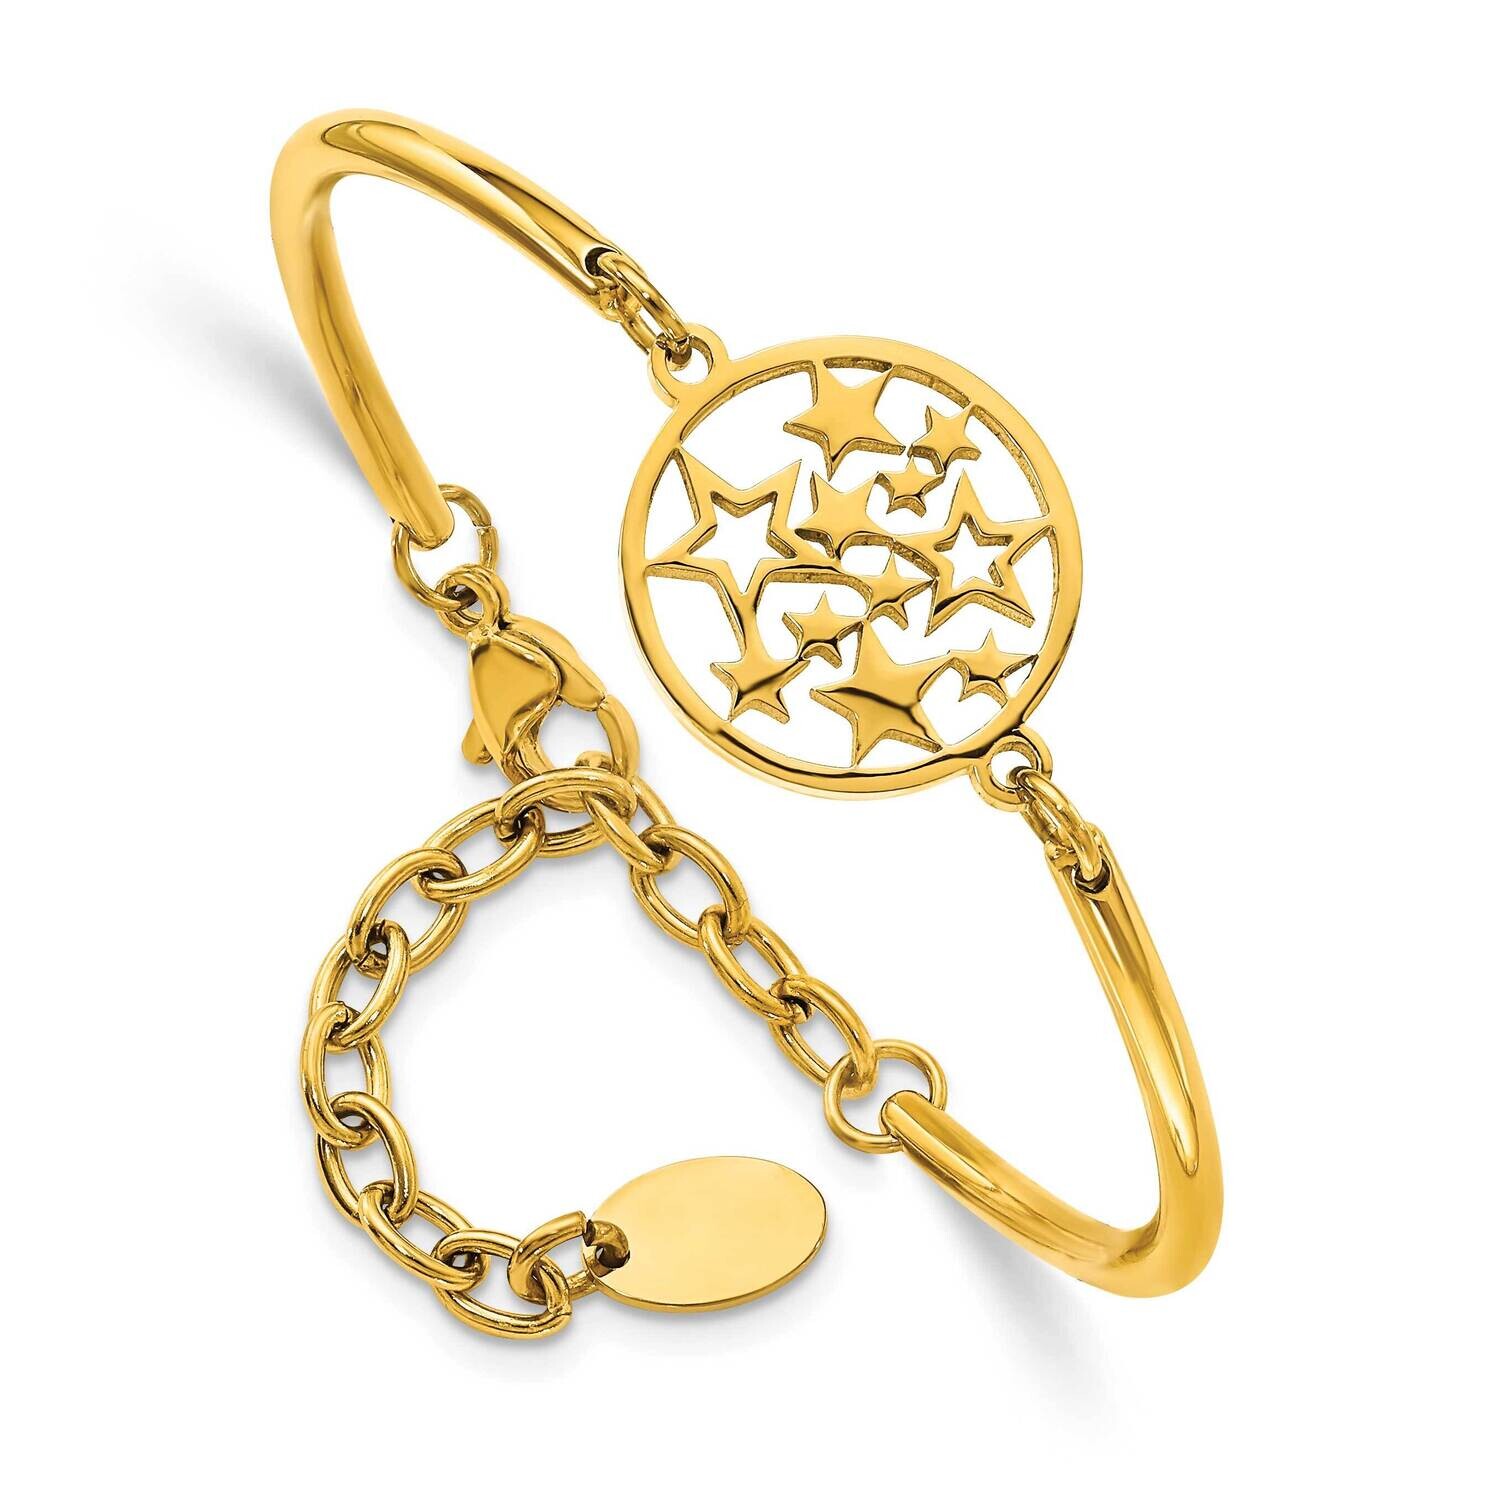 Chisel Polished Yellow Ip-Plated Stars 5.5 Inch Bangle Bracelet 2 Inch Extension Stainless Steel SRB3109Y-5.5